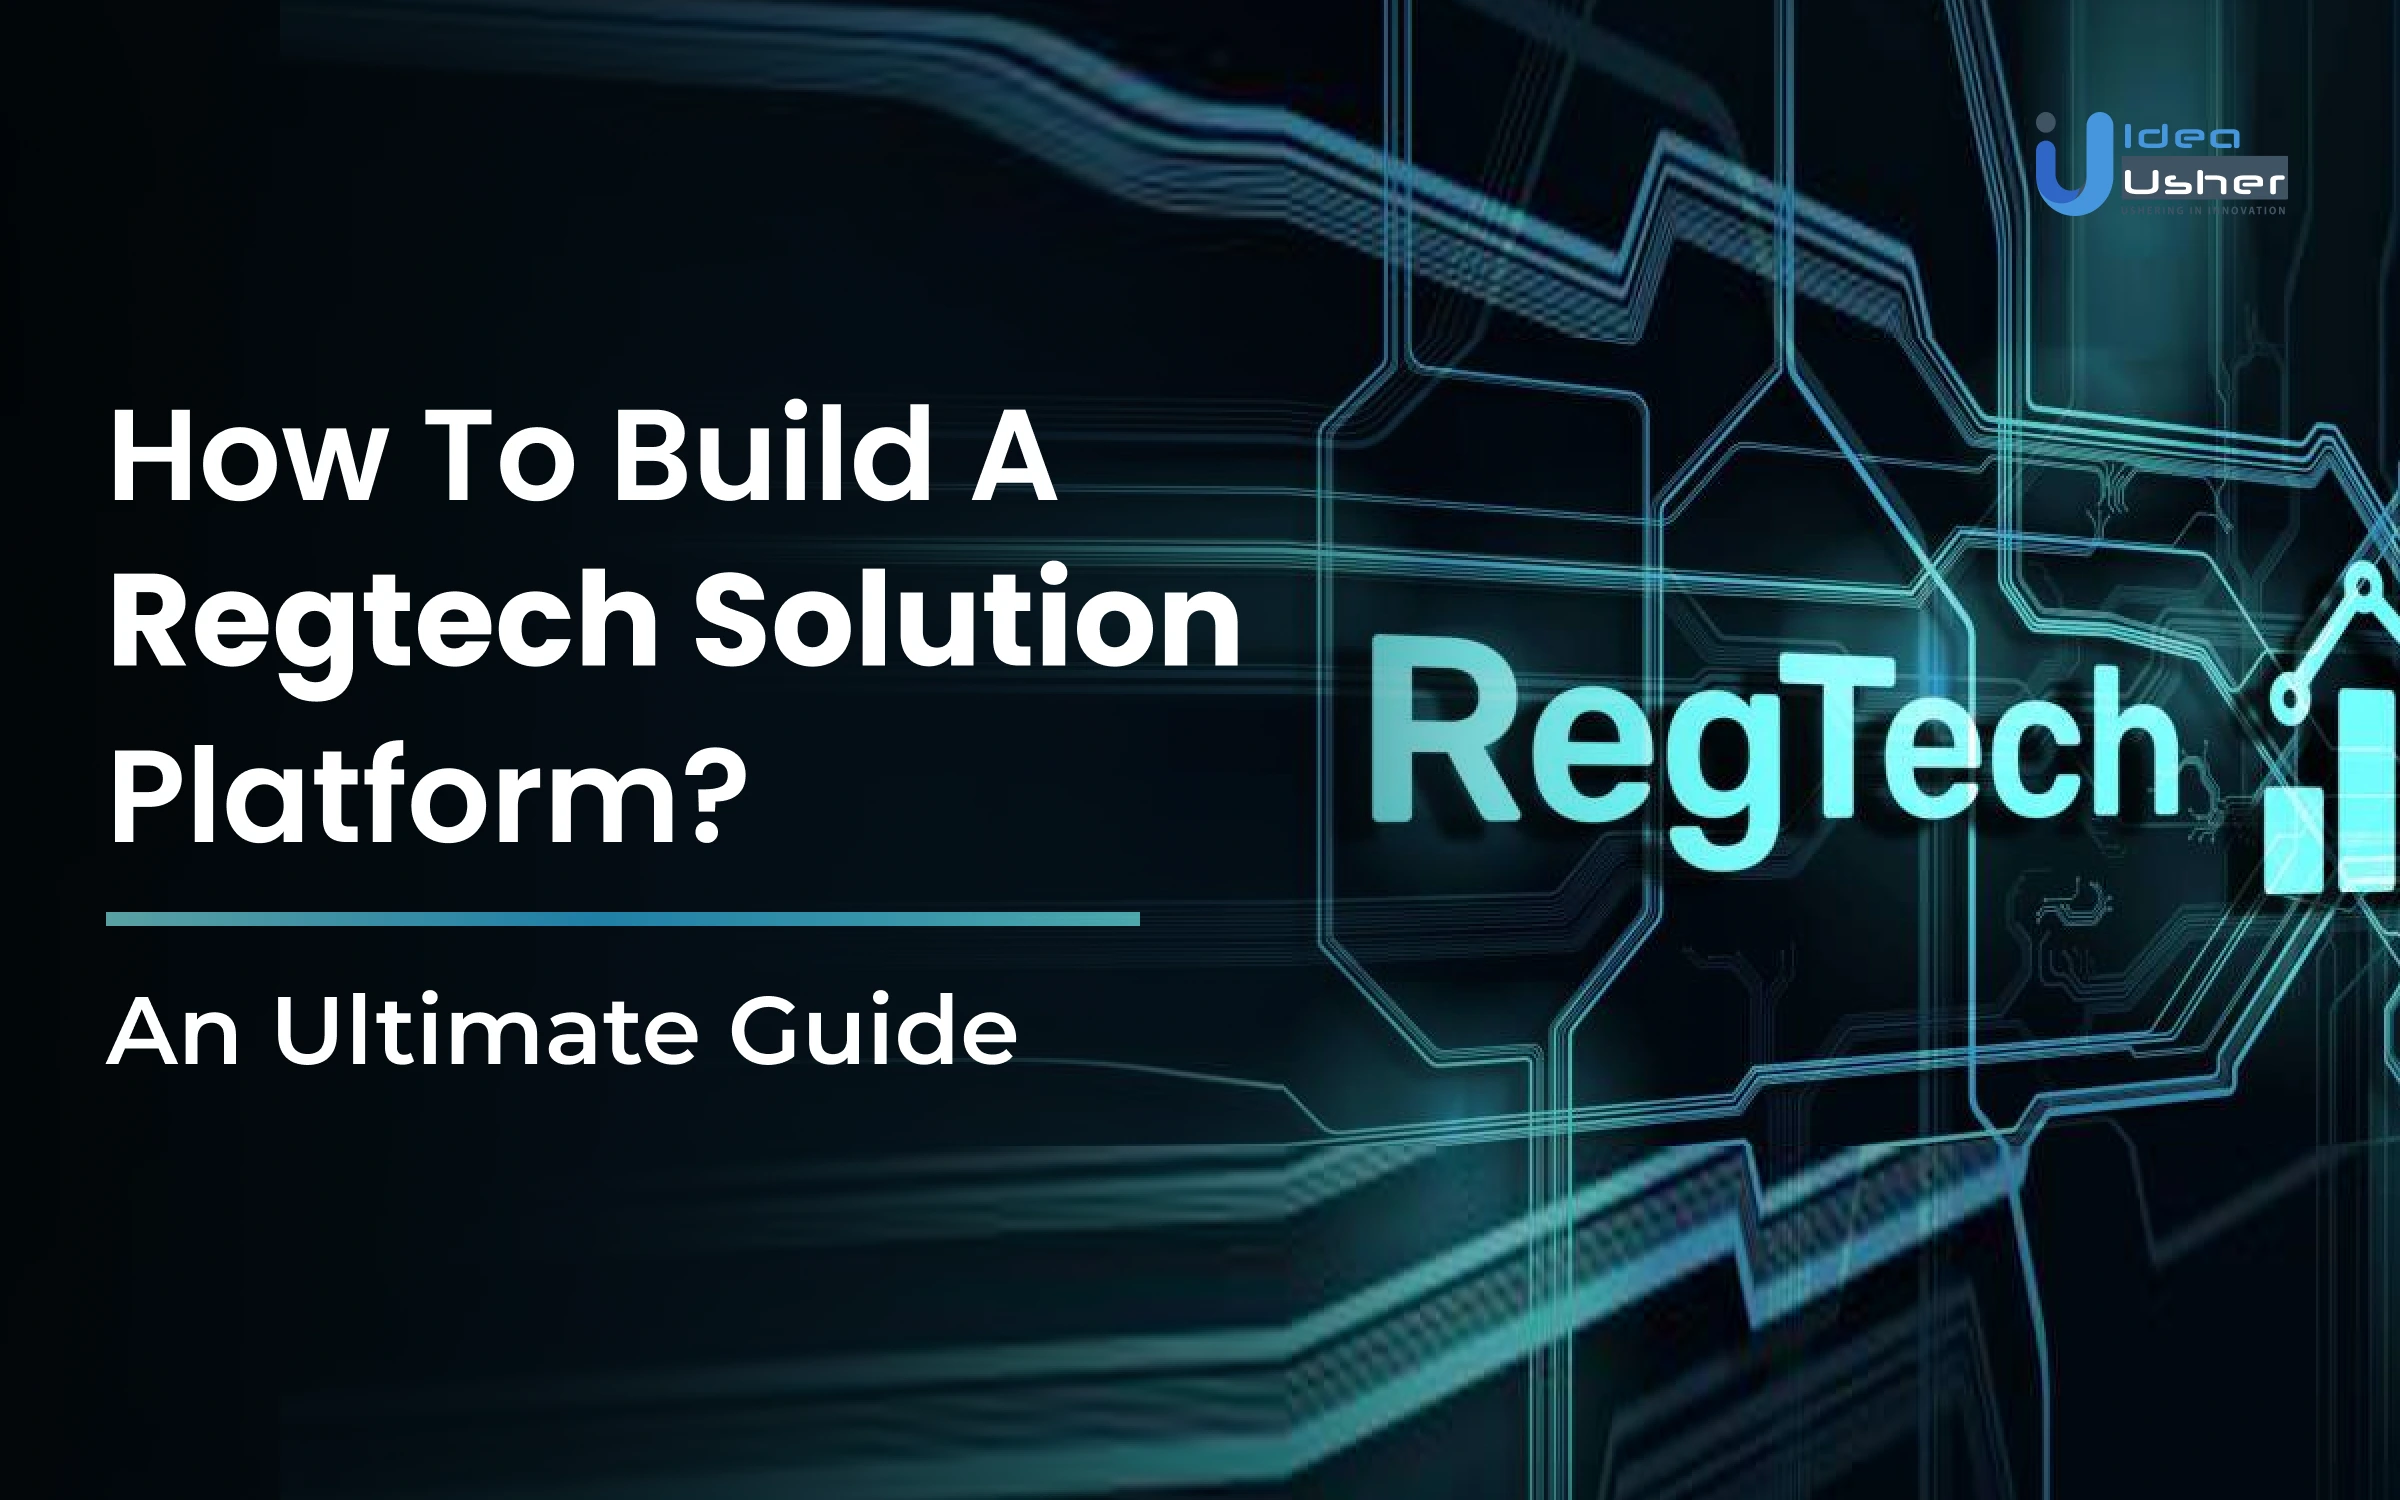 How To Build A Regtech Solution Platform - An Ultimate Guide